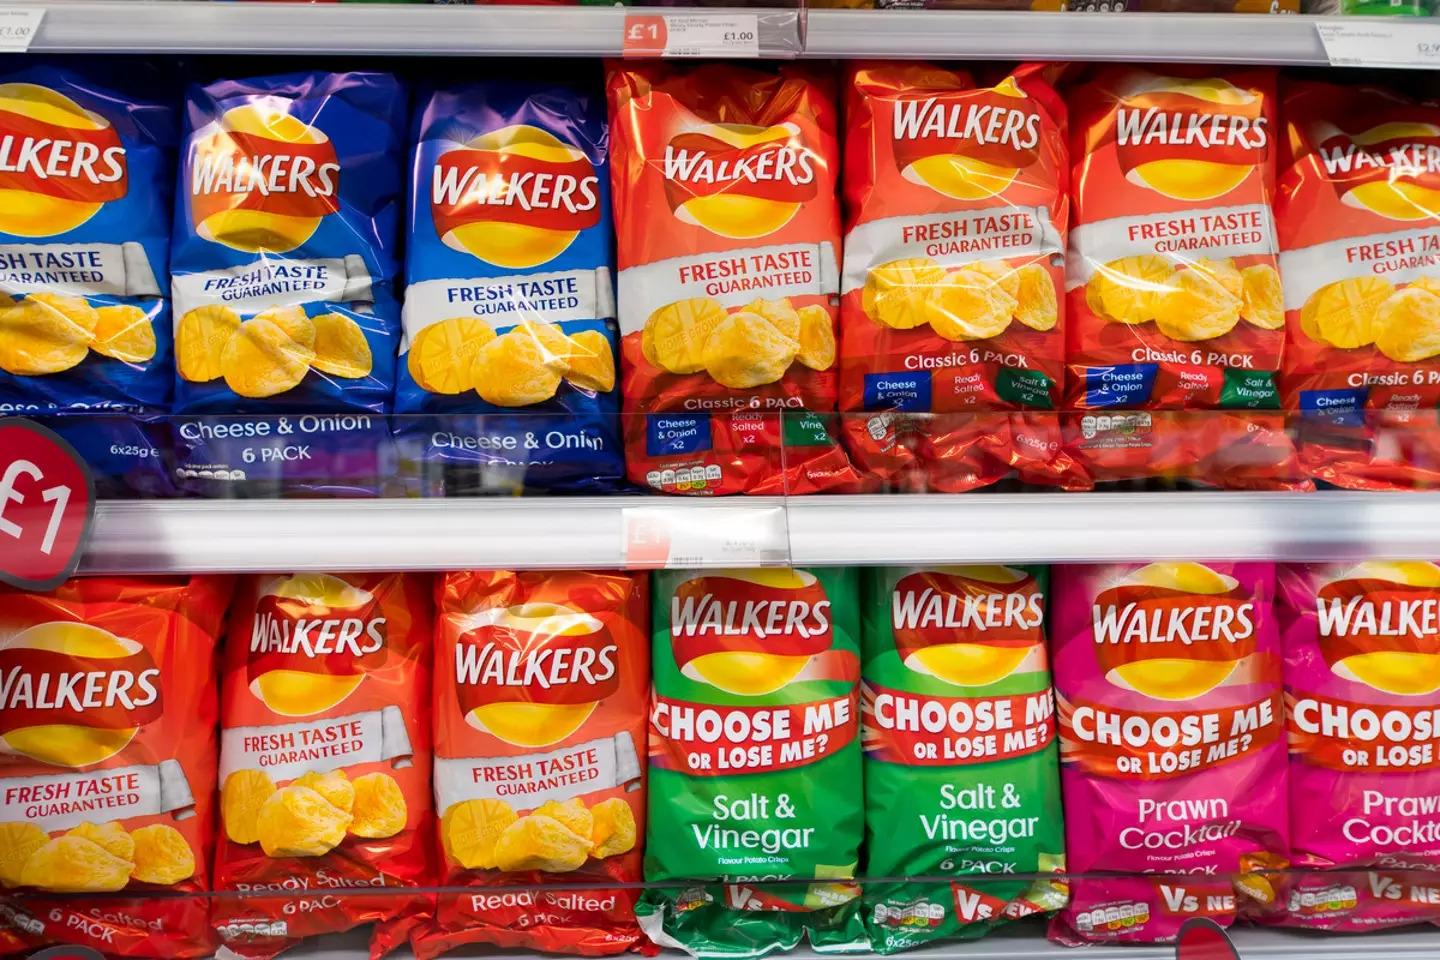 Walkers crisps can only be found in the aisles in UK and Ireland.